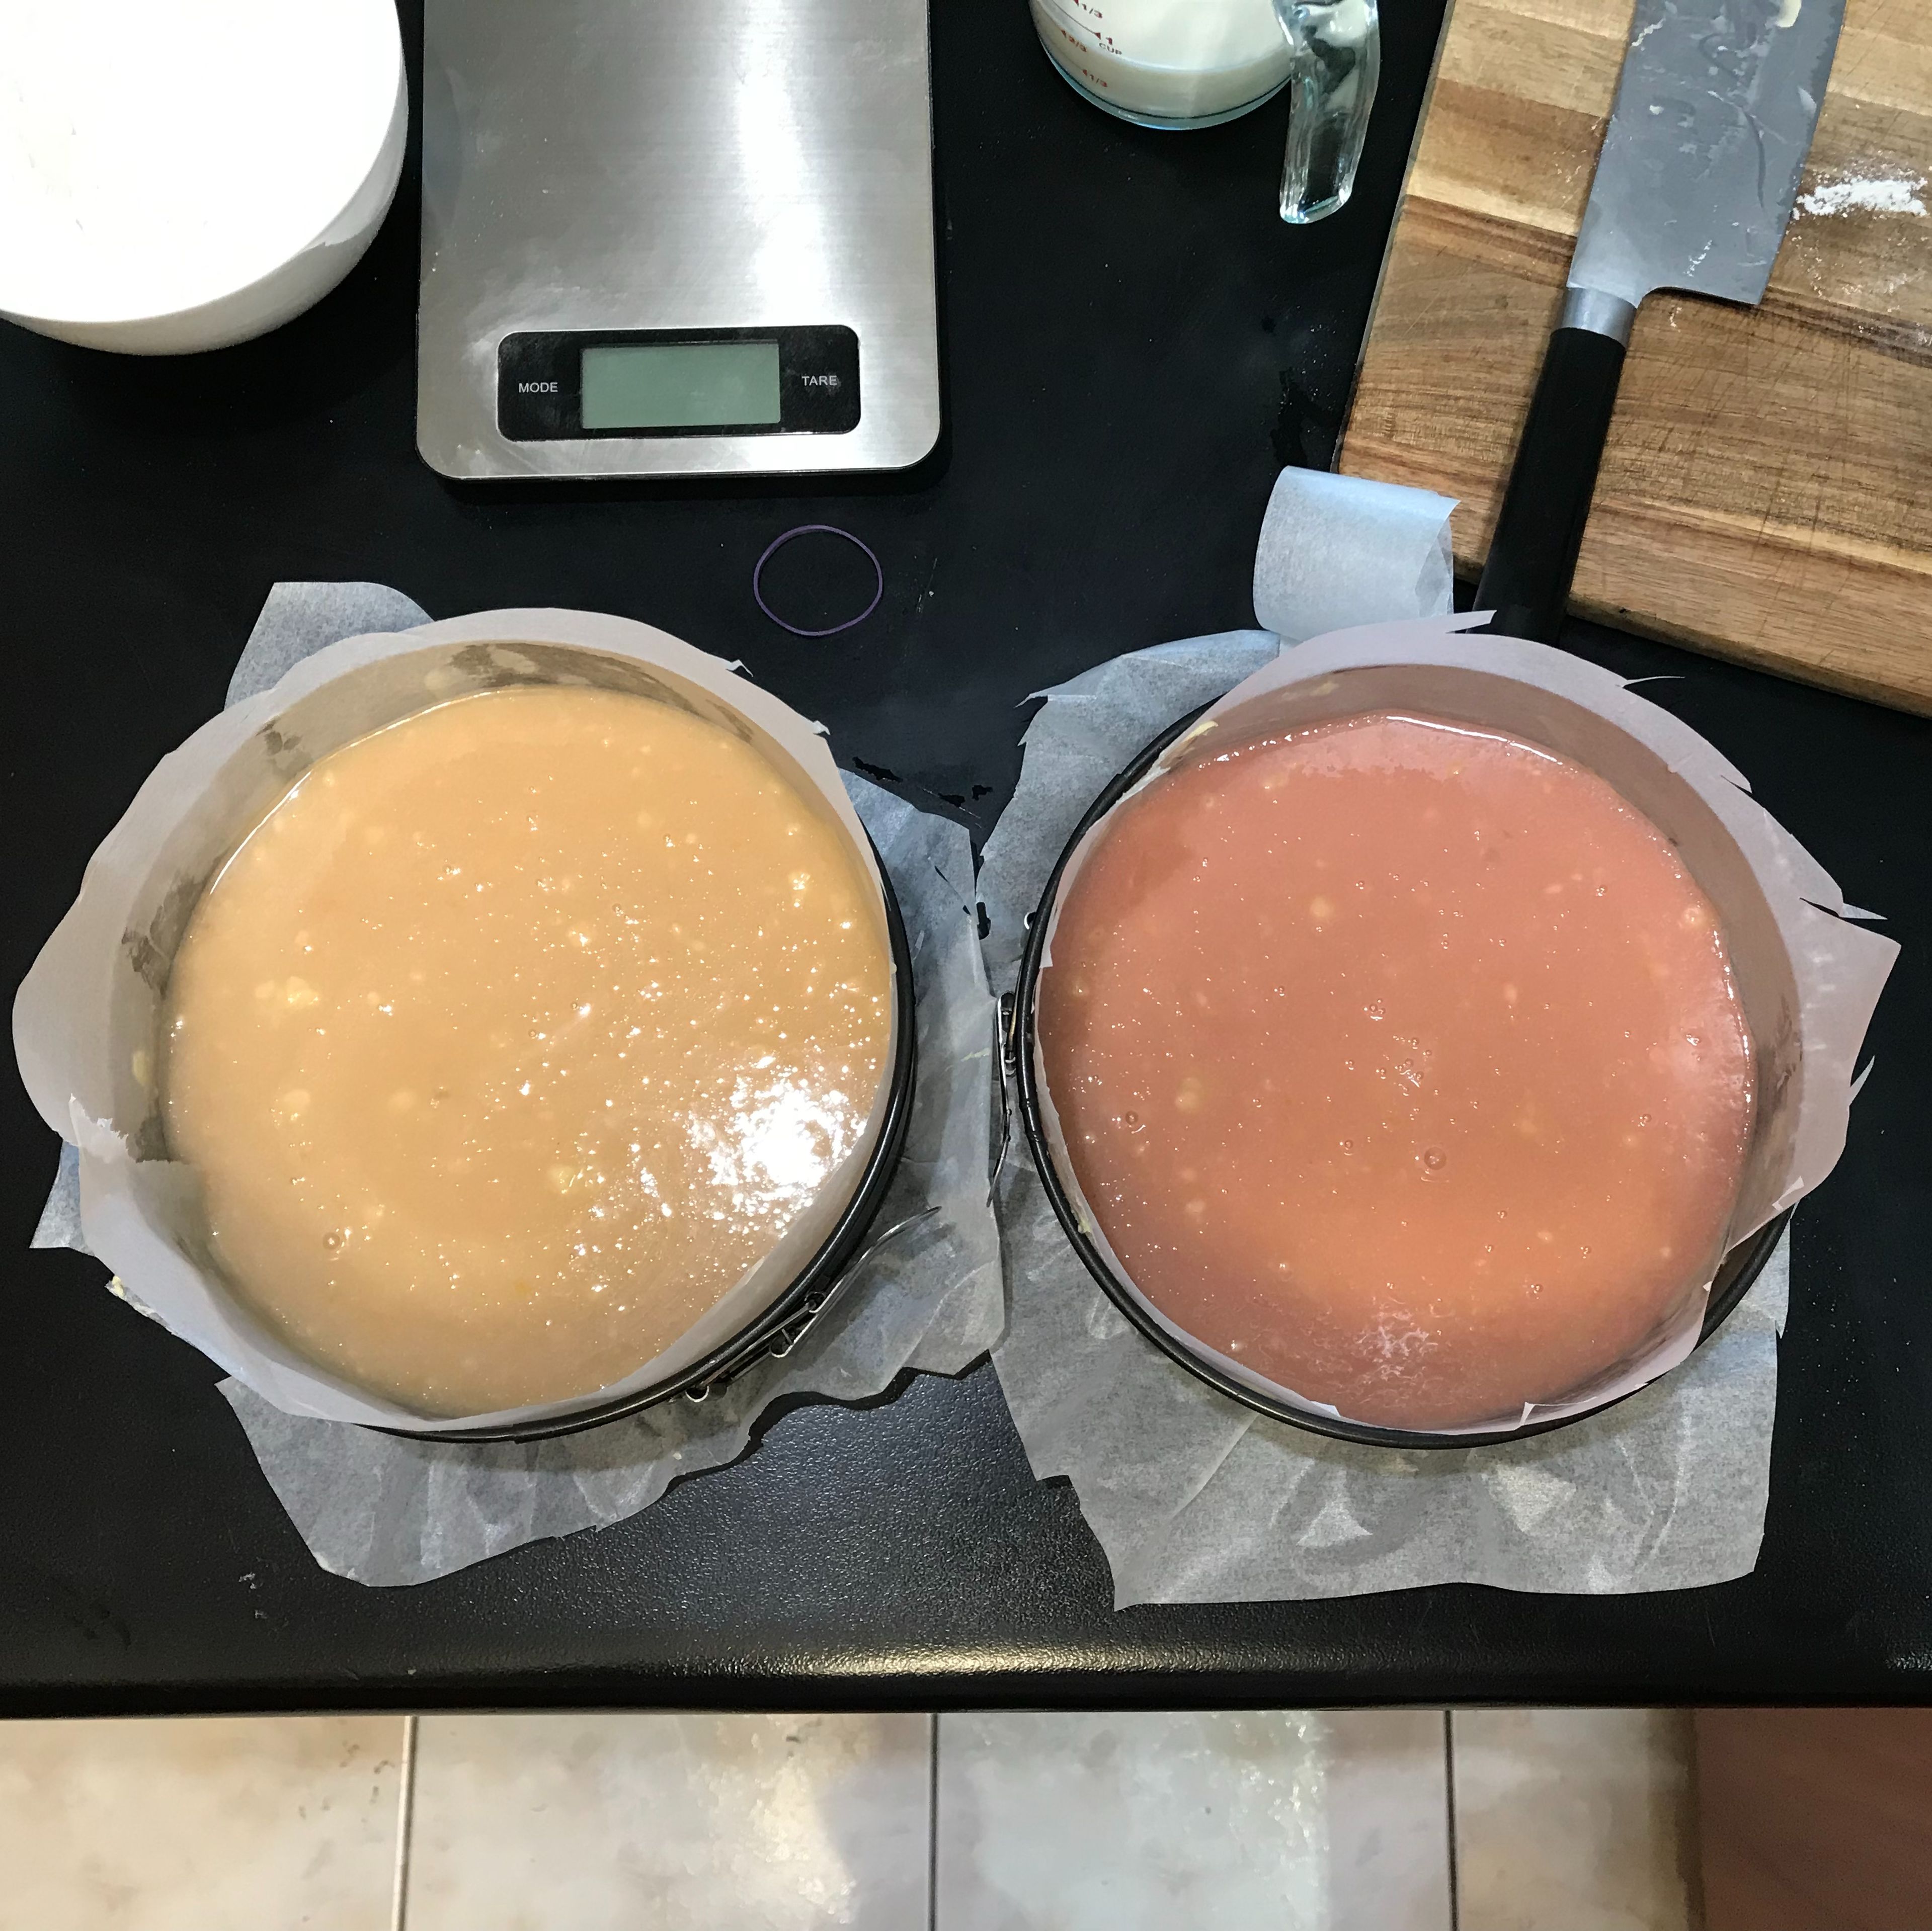 Pour batter from the two bowls into each of the two cake tins, and bake in the oven for approximately 30-35 minutes or until a skewer inserted in the middle comes out clean.